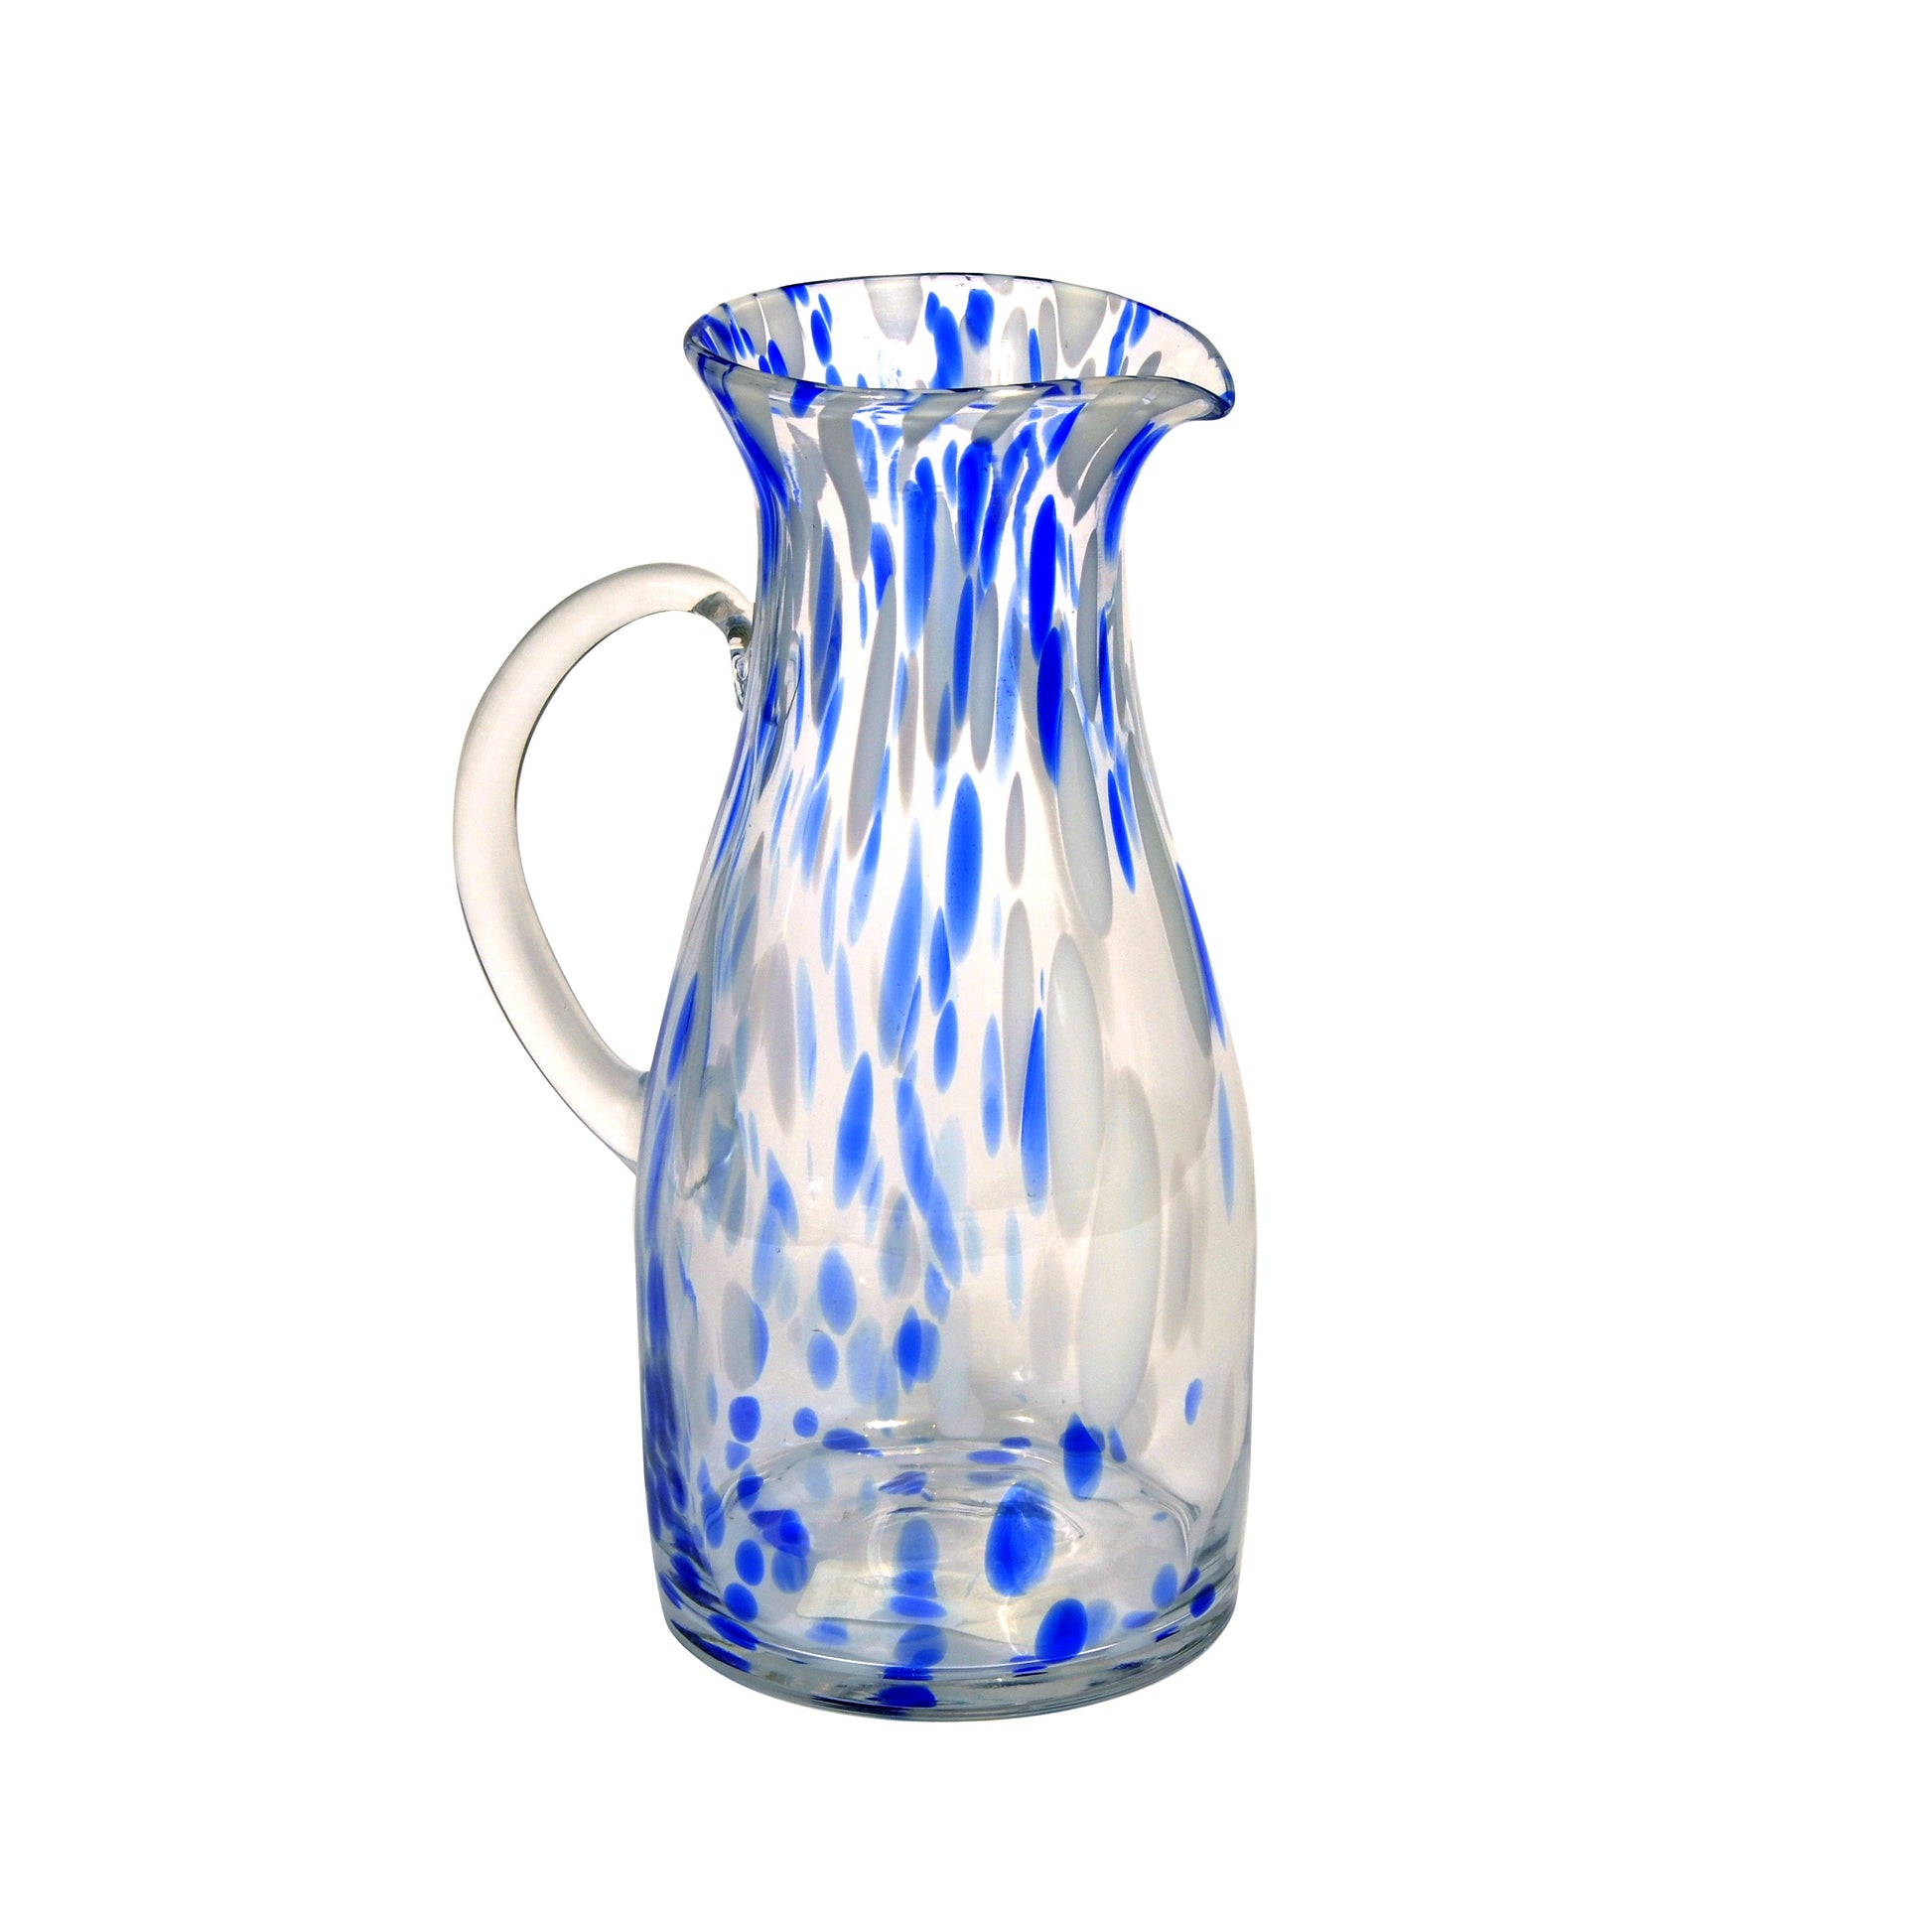 Cobalt and White Speckled Glass Jug Not specified